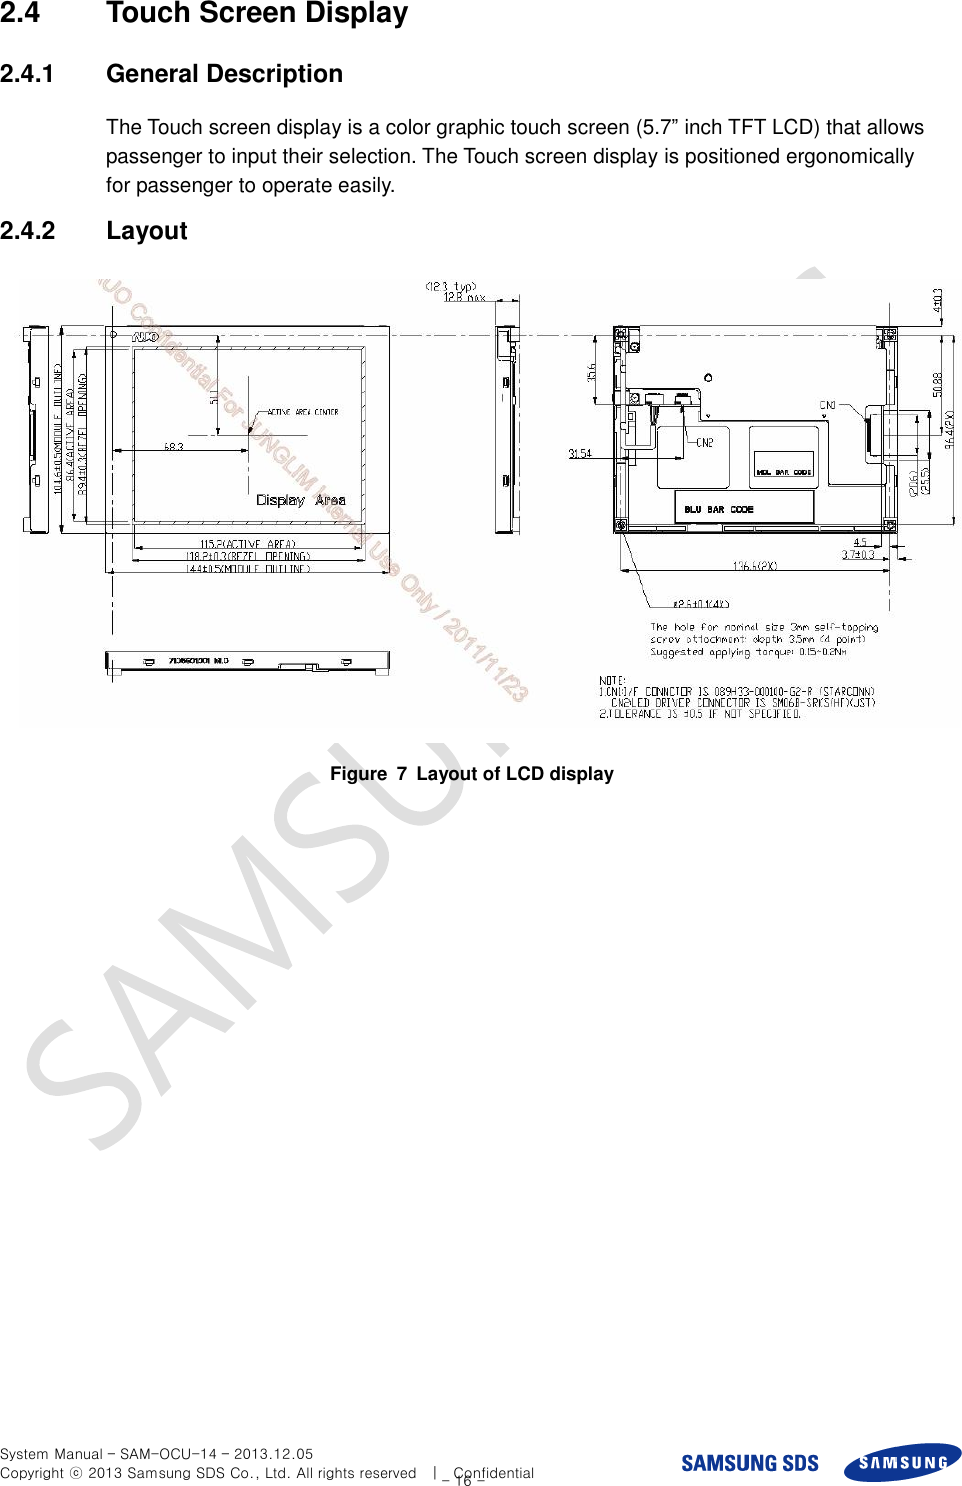  System Manual – SAM-OCU-14 – 2013.12.05 Copyright ⓒ 2013 Samsung SDS Co., Ltd. All rights reserved    |    Confidential - 16 - 2.4  Touch Screen Display 2.4.1  General Description The Touch screen display is a color graphic touch screen (5.7” inch TFT LCD) that allows passenger to input their selection. The Touch screen display is positioned ergonomically for passenger to operate easily. 2.4.2  Layout  Figure  7  Layout of LCD display 